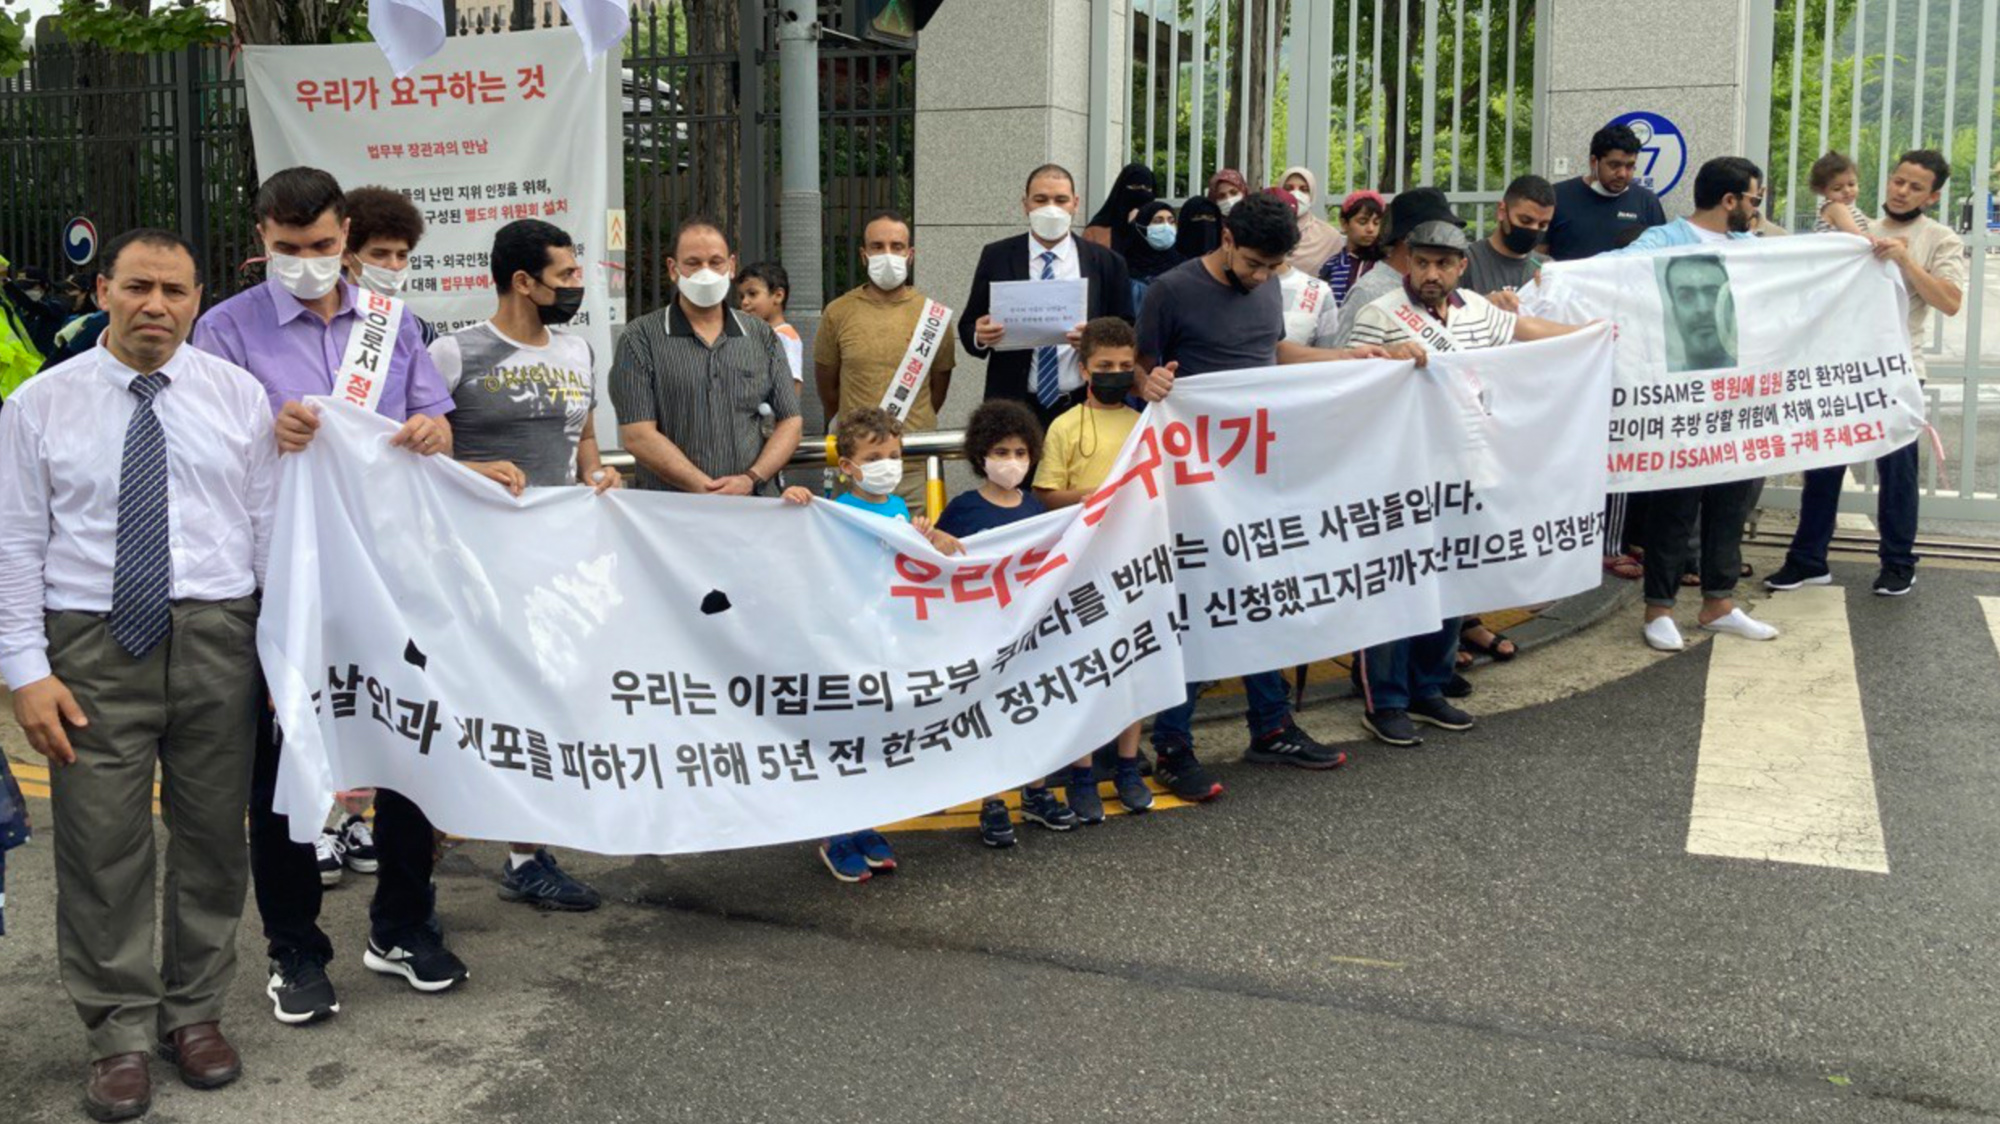 Egyptian asylum seekers have held a sit-in in front of the justice ministry in Gwacheon, South Korea, since 6 July (MEE/Irang Bak)